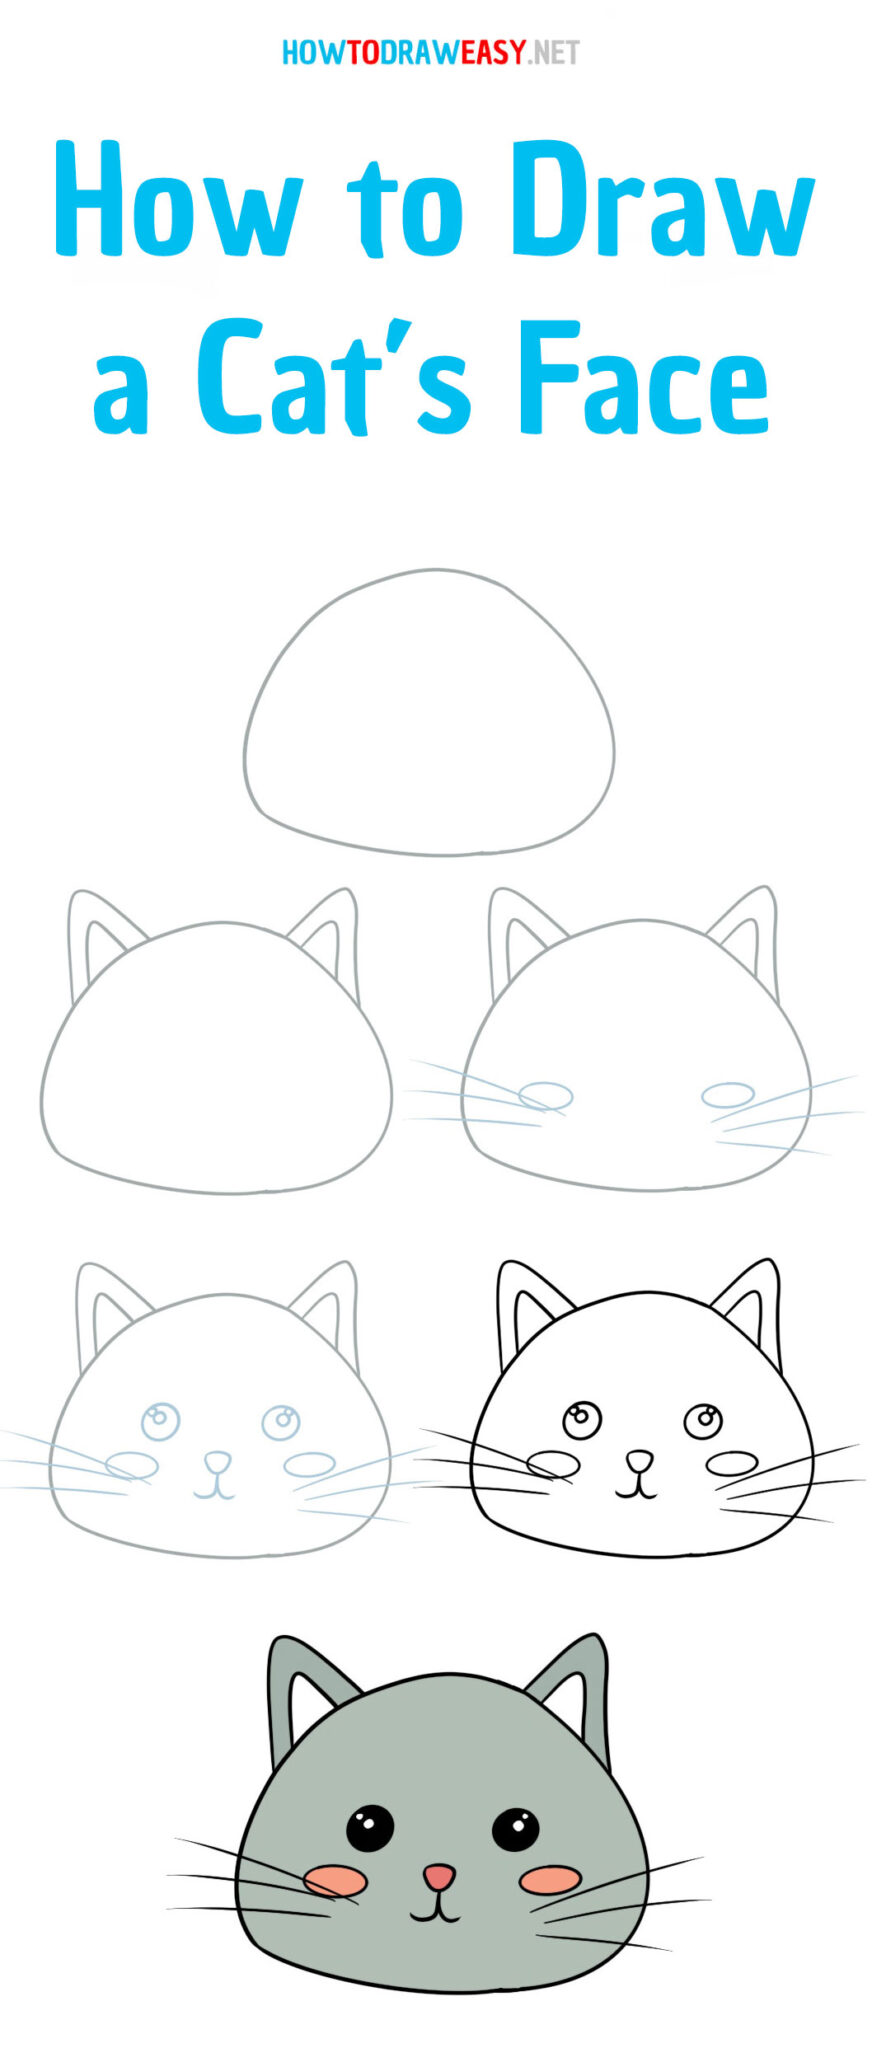 How to Draw a Cat's Face How to Draw Easy